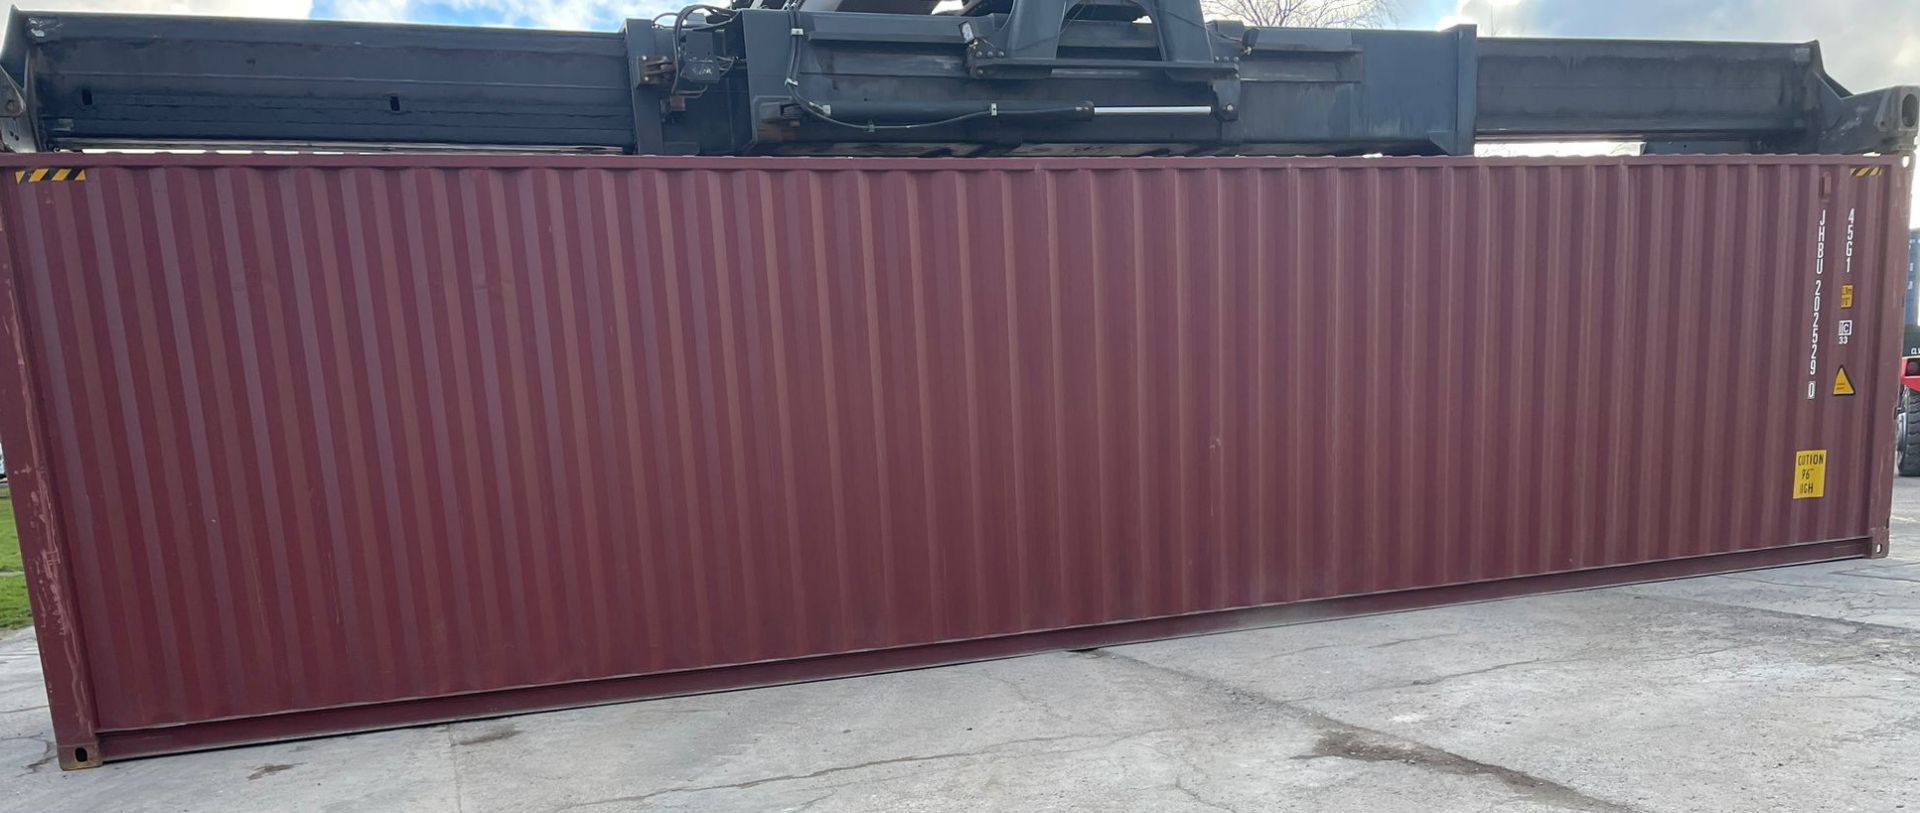 40ft HC Shipping Container - ref JHBU2025290 - Image 3 of 6